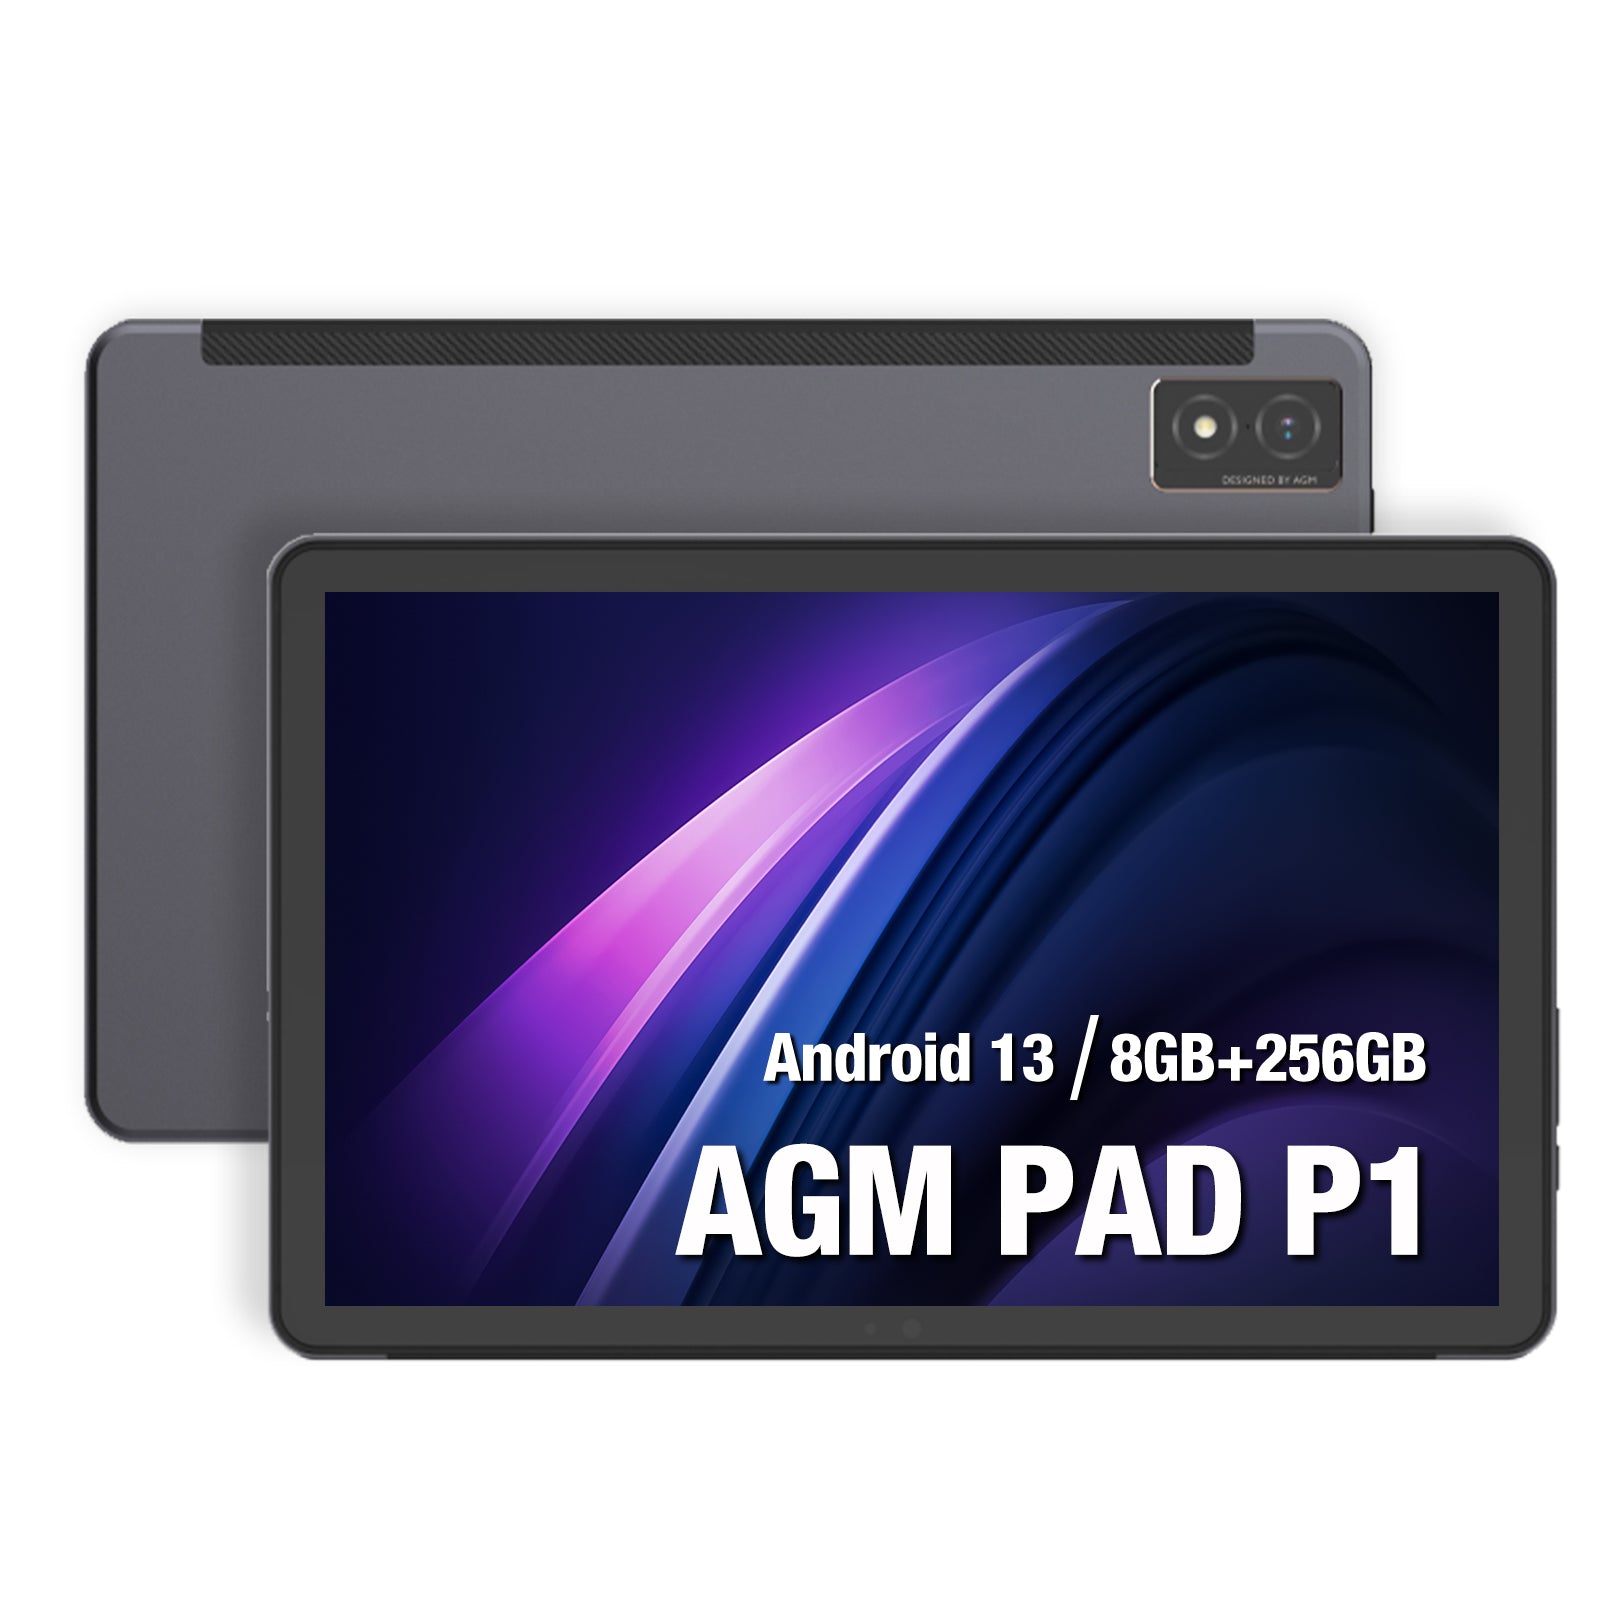 AGM PAD P1 | 4G LTE Rugged Tablet | Powerful Chipset | Waterproof | Lightweight | Large Display 1200*2000 FHD | Big Battery | Android 13